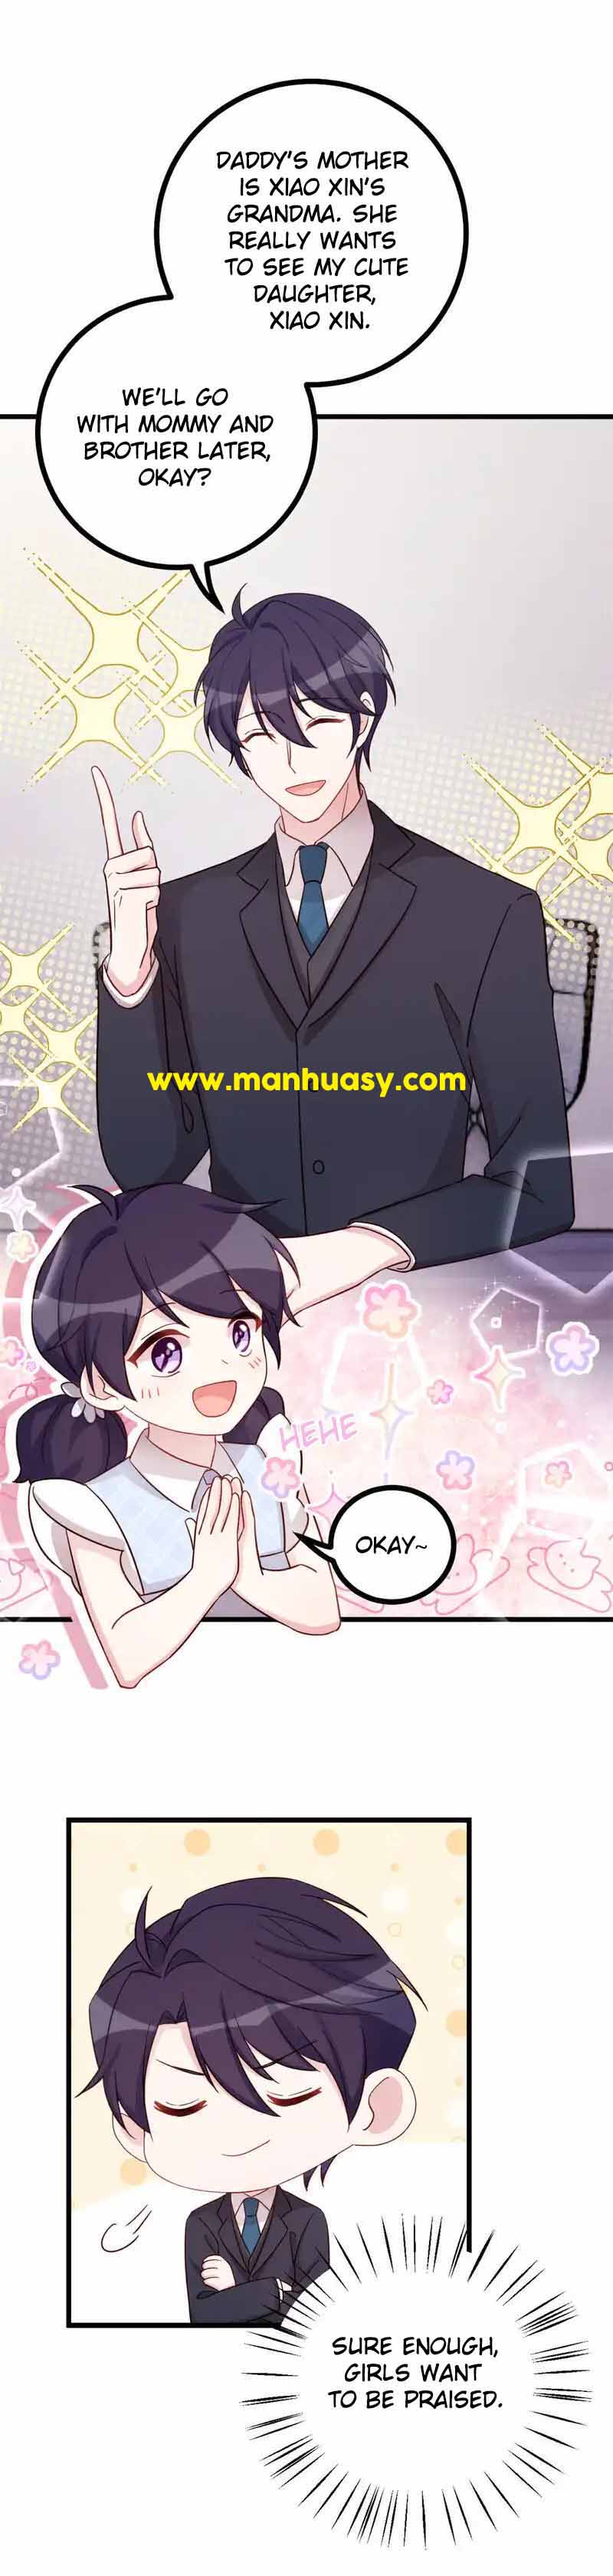 Xiao Bai’S Father Is A Wonderful Person - chapter 432 - #4